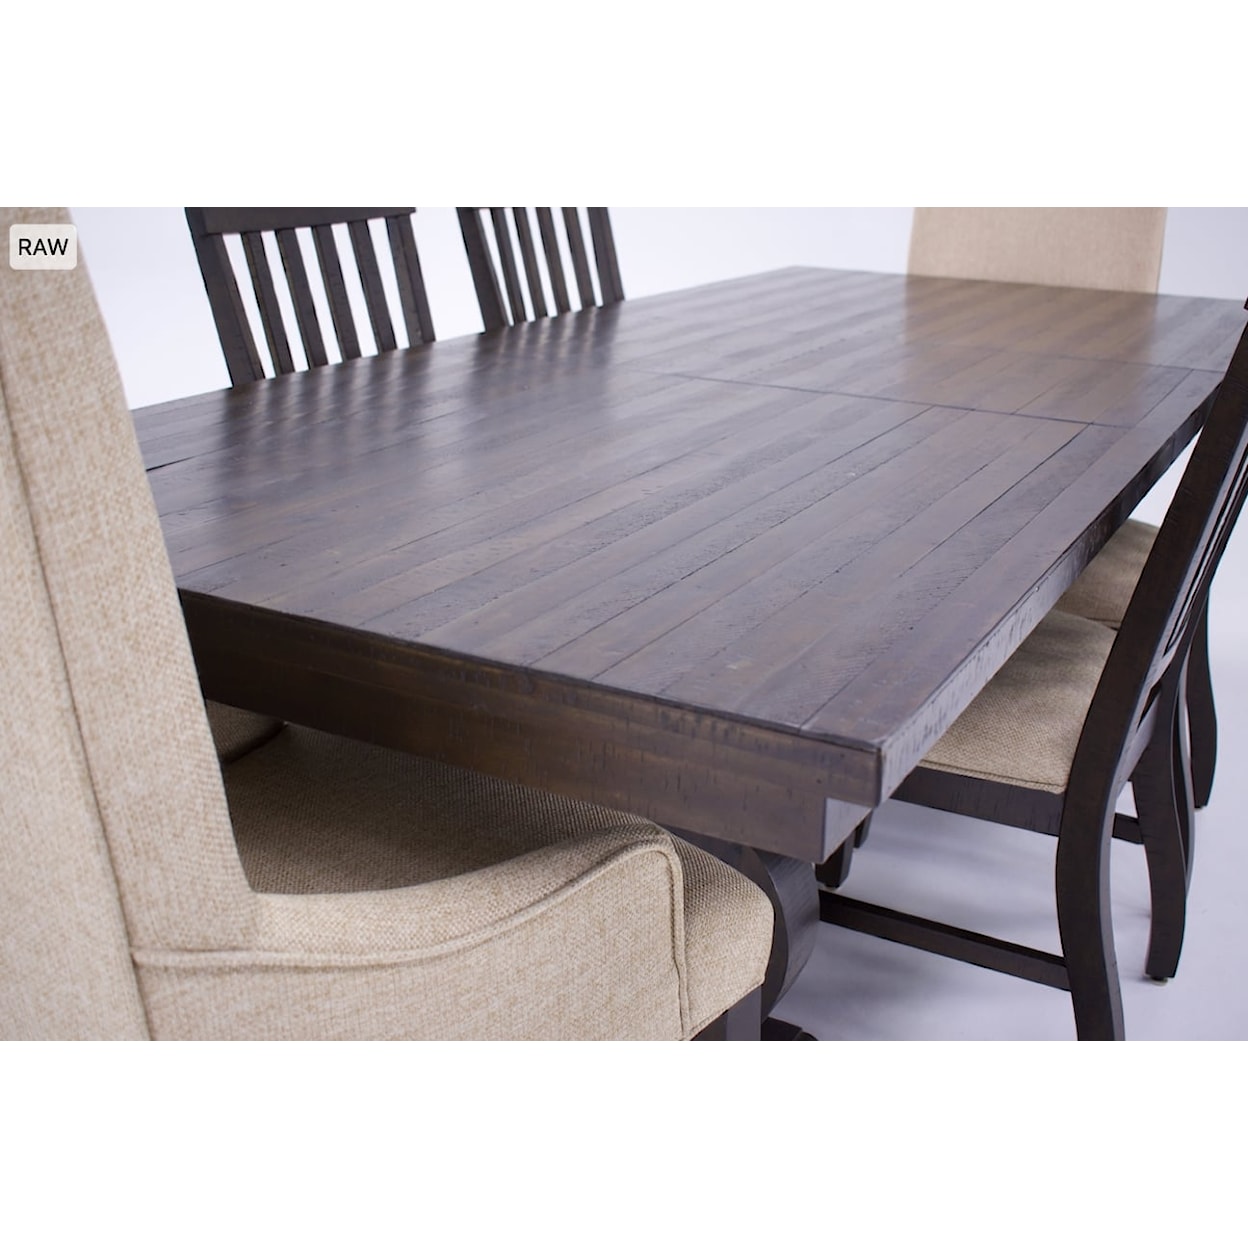 JB Home Mabell Mabell Dining Table & 6 Chairs